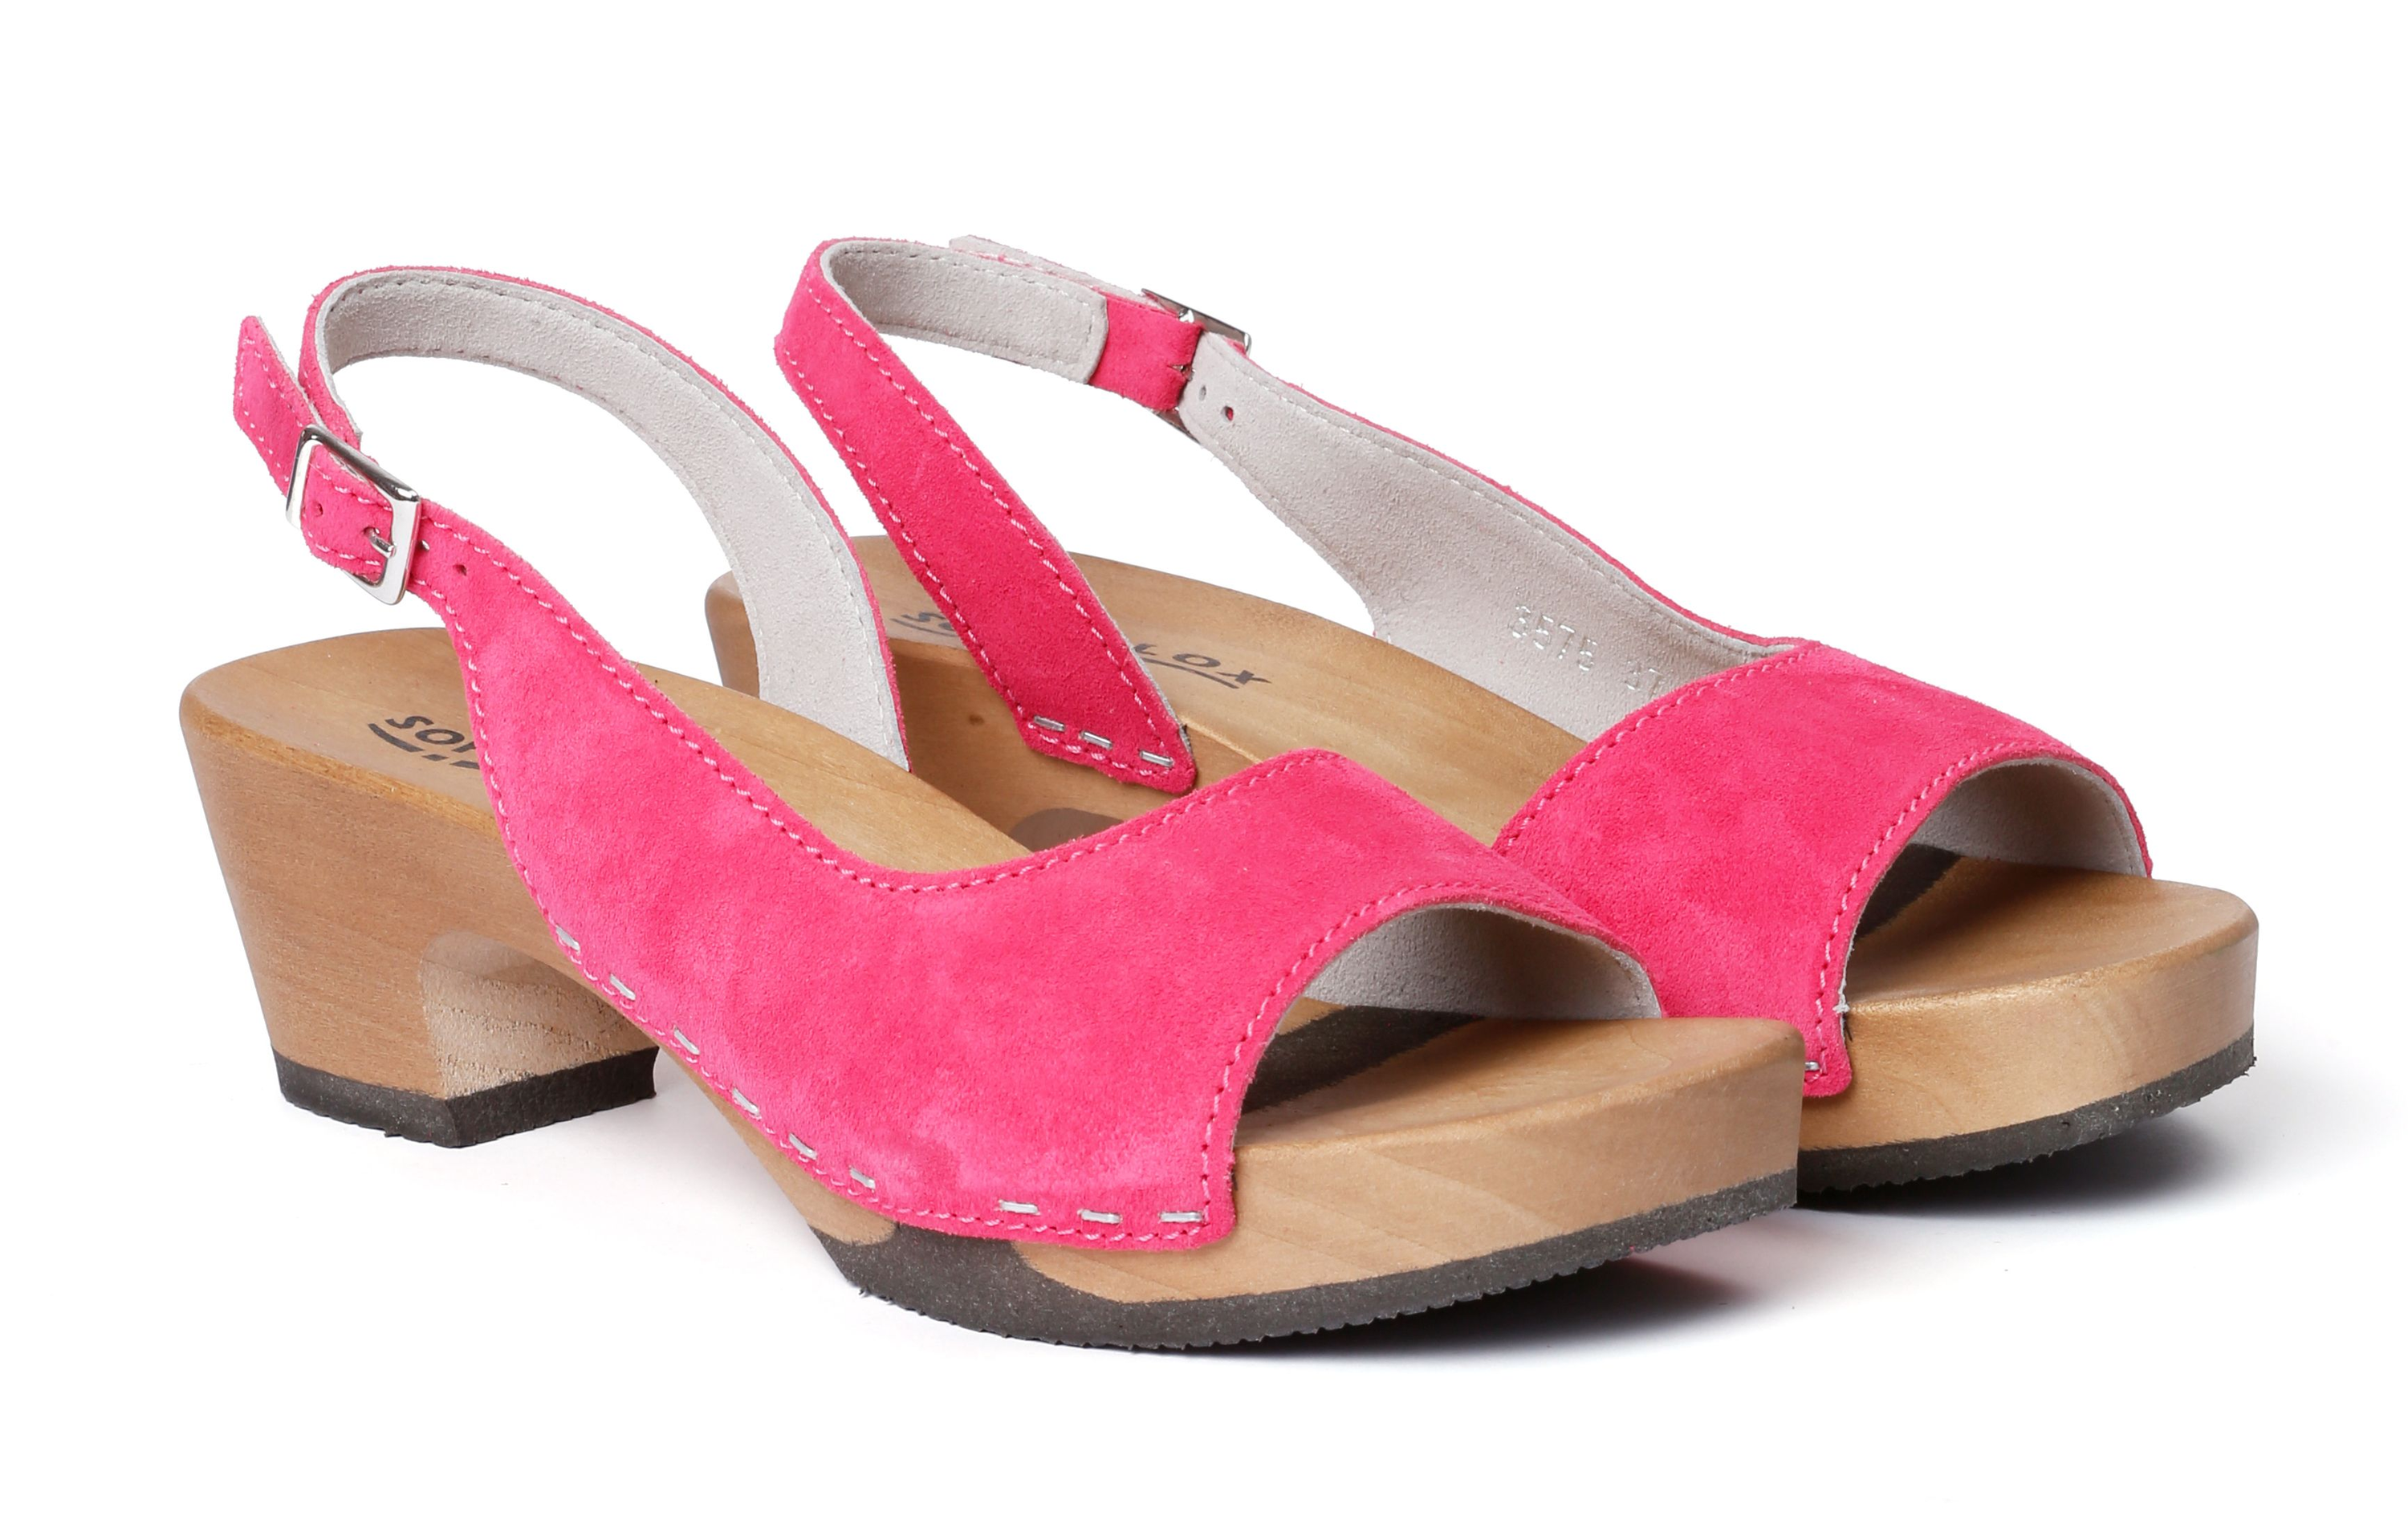 Sandals from poplar wood smooth suede in color pink kiss by Softclox